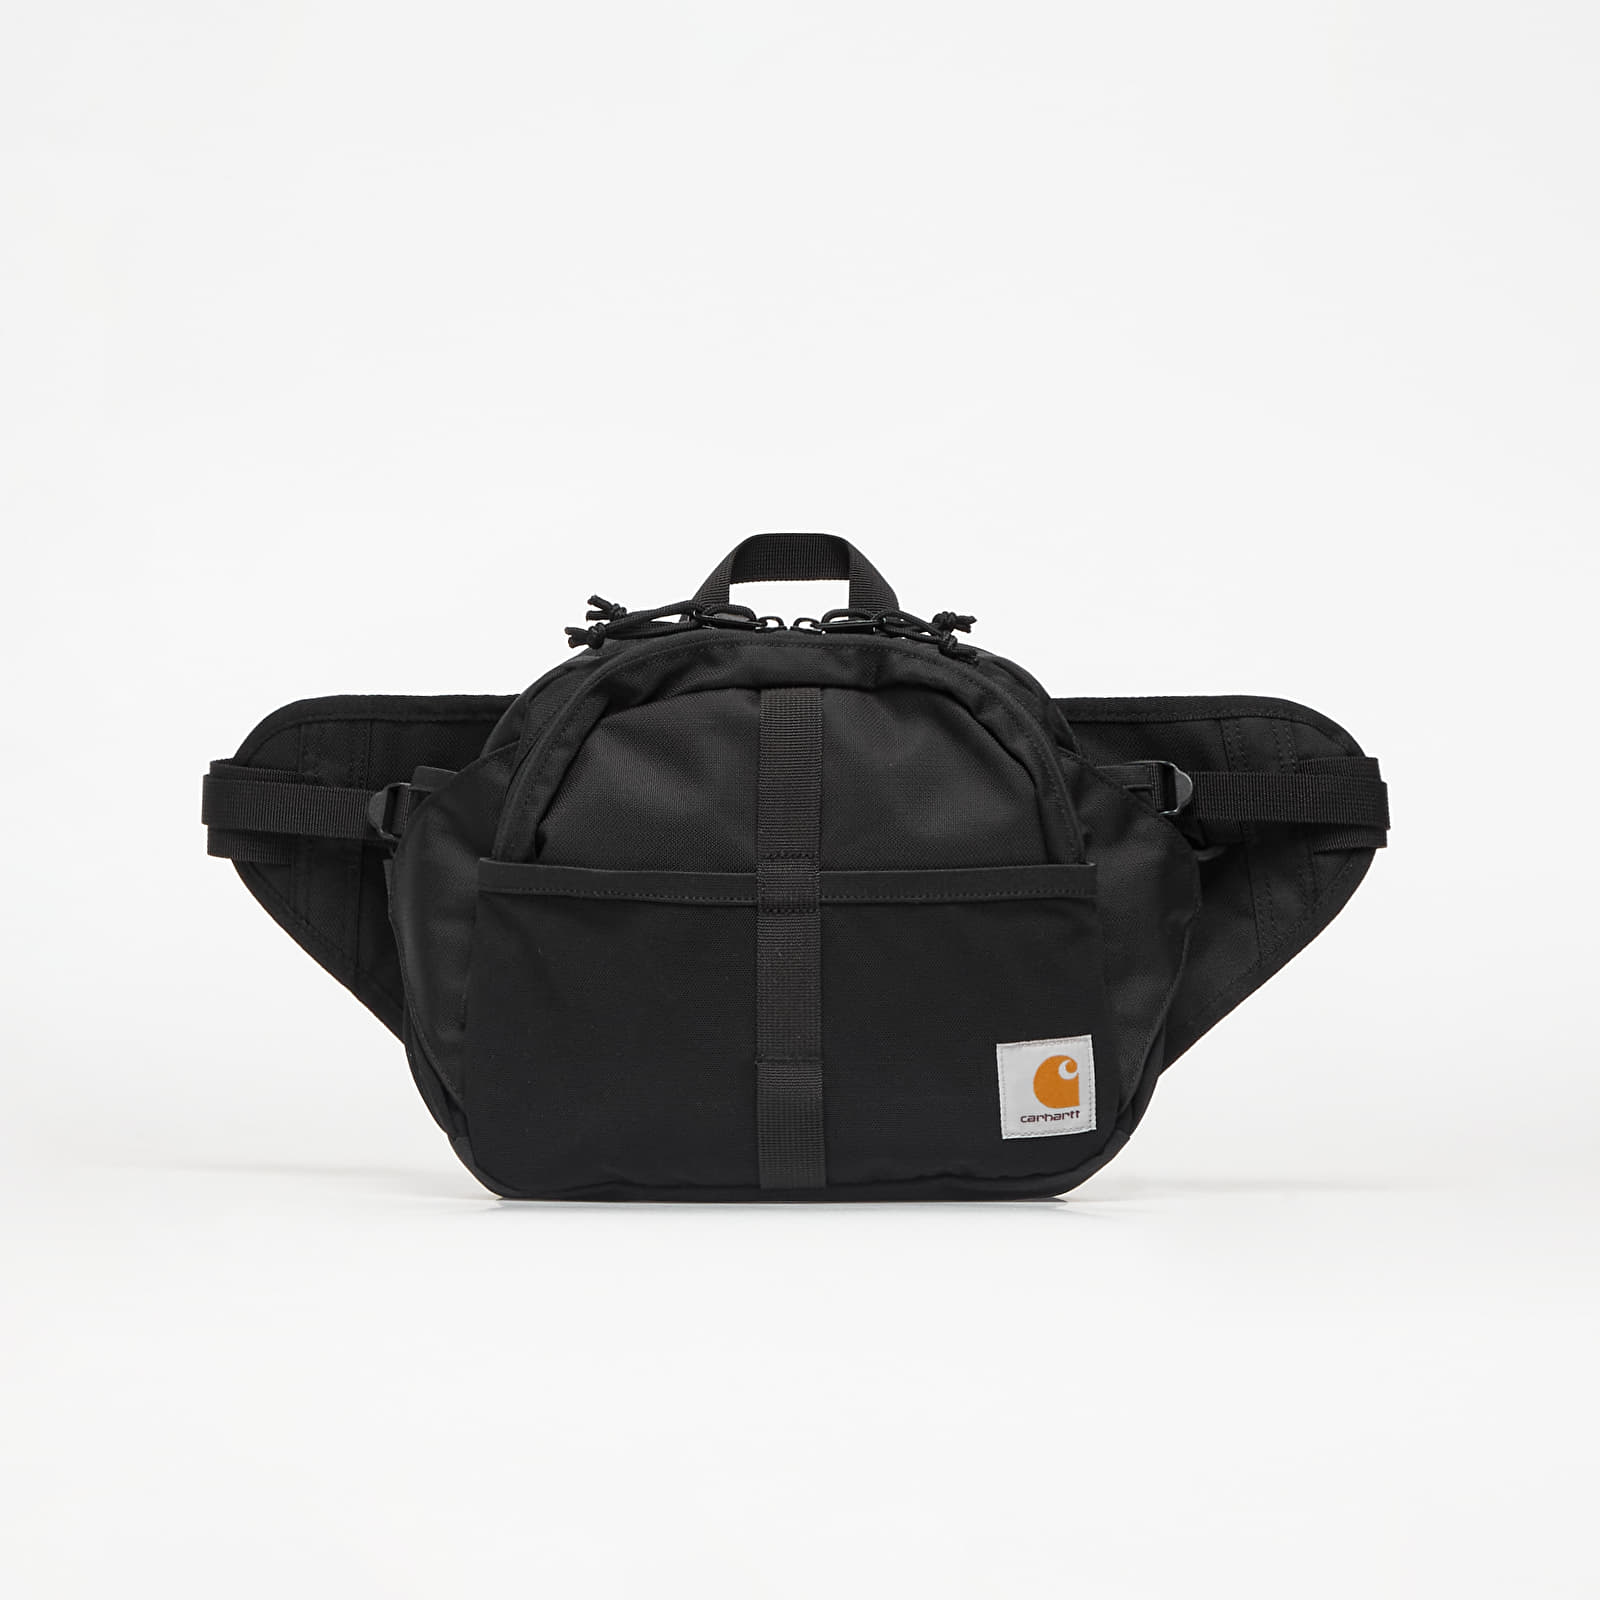 CARHARTT WIP DELTA DAY PACK